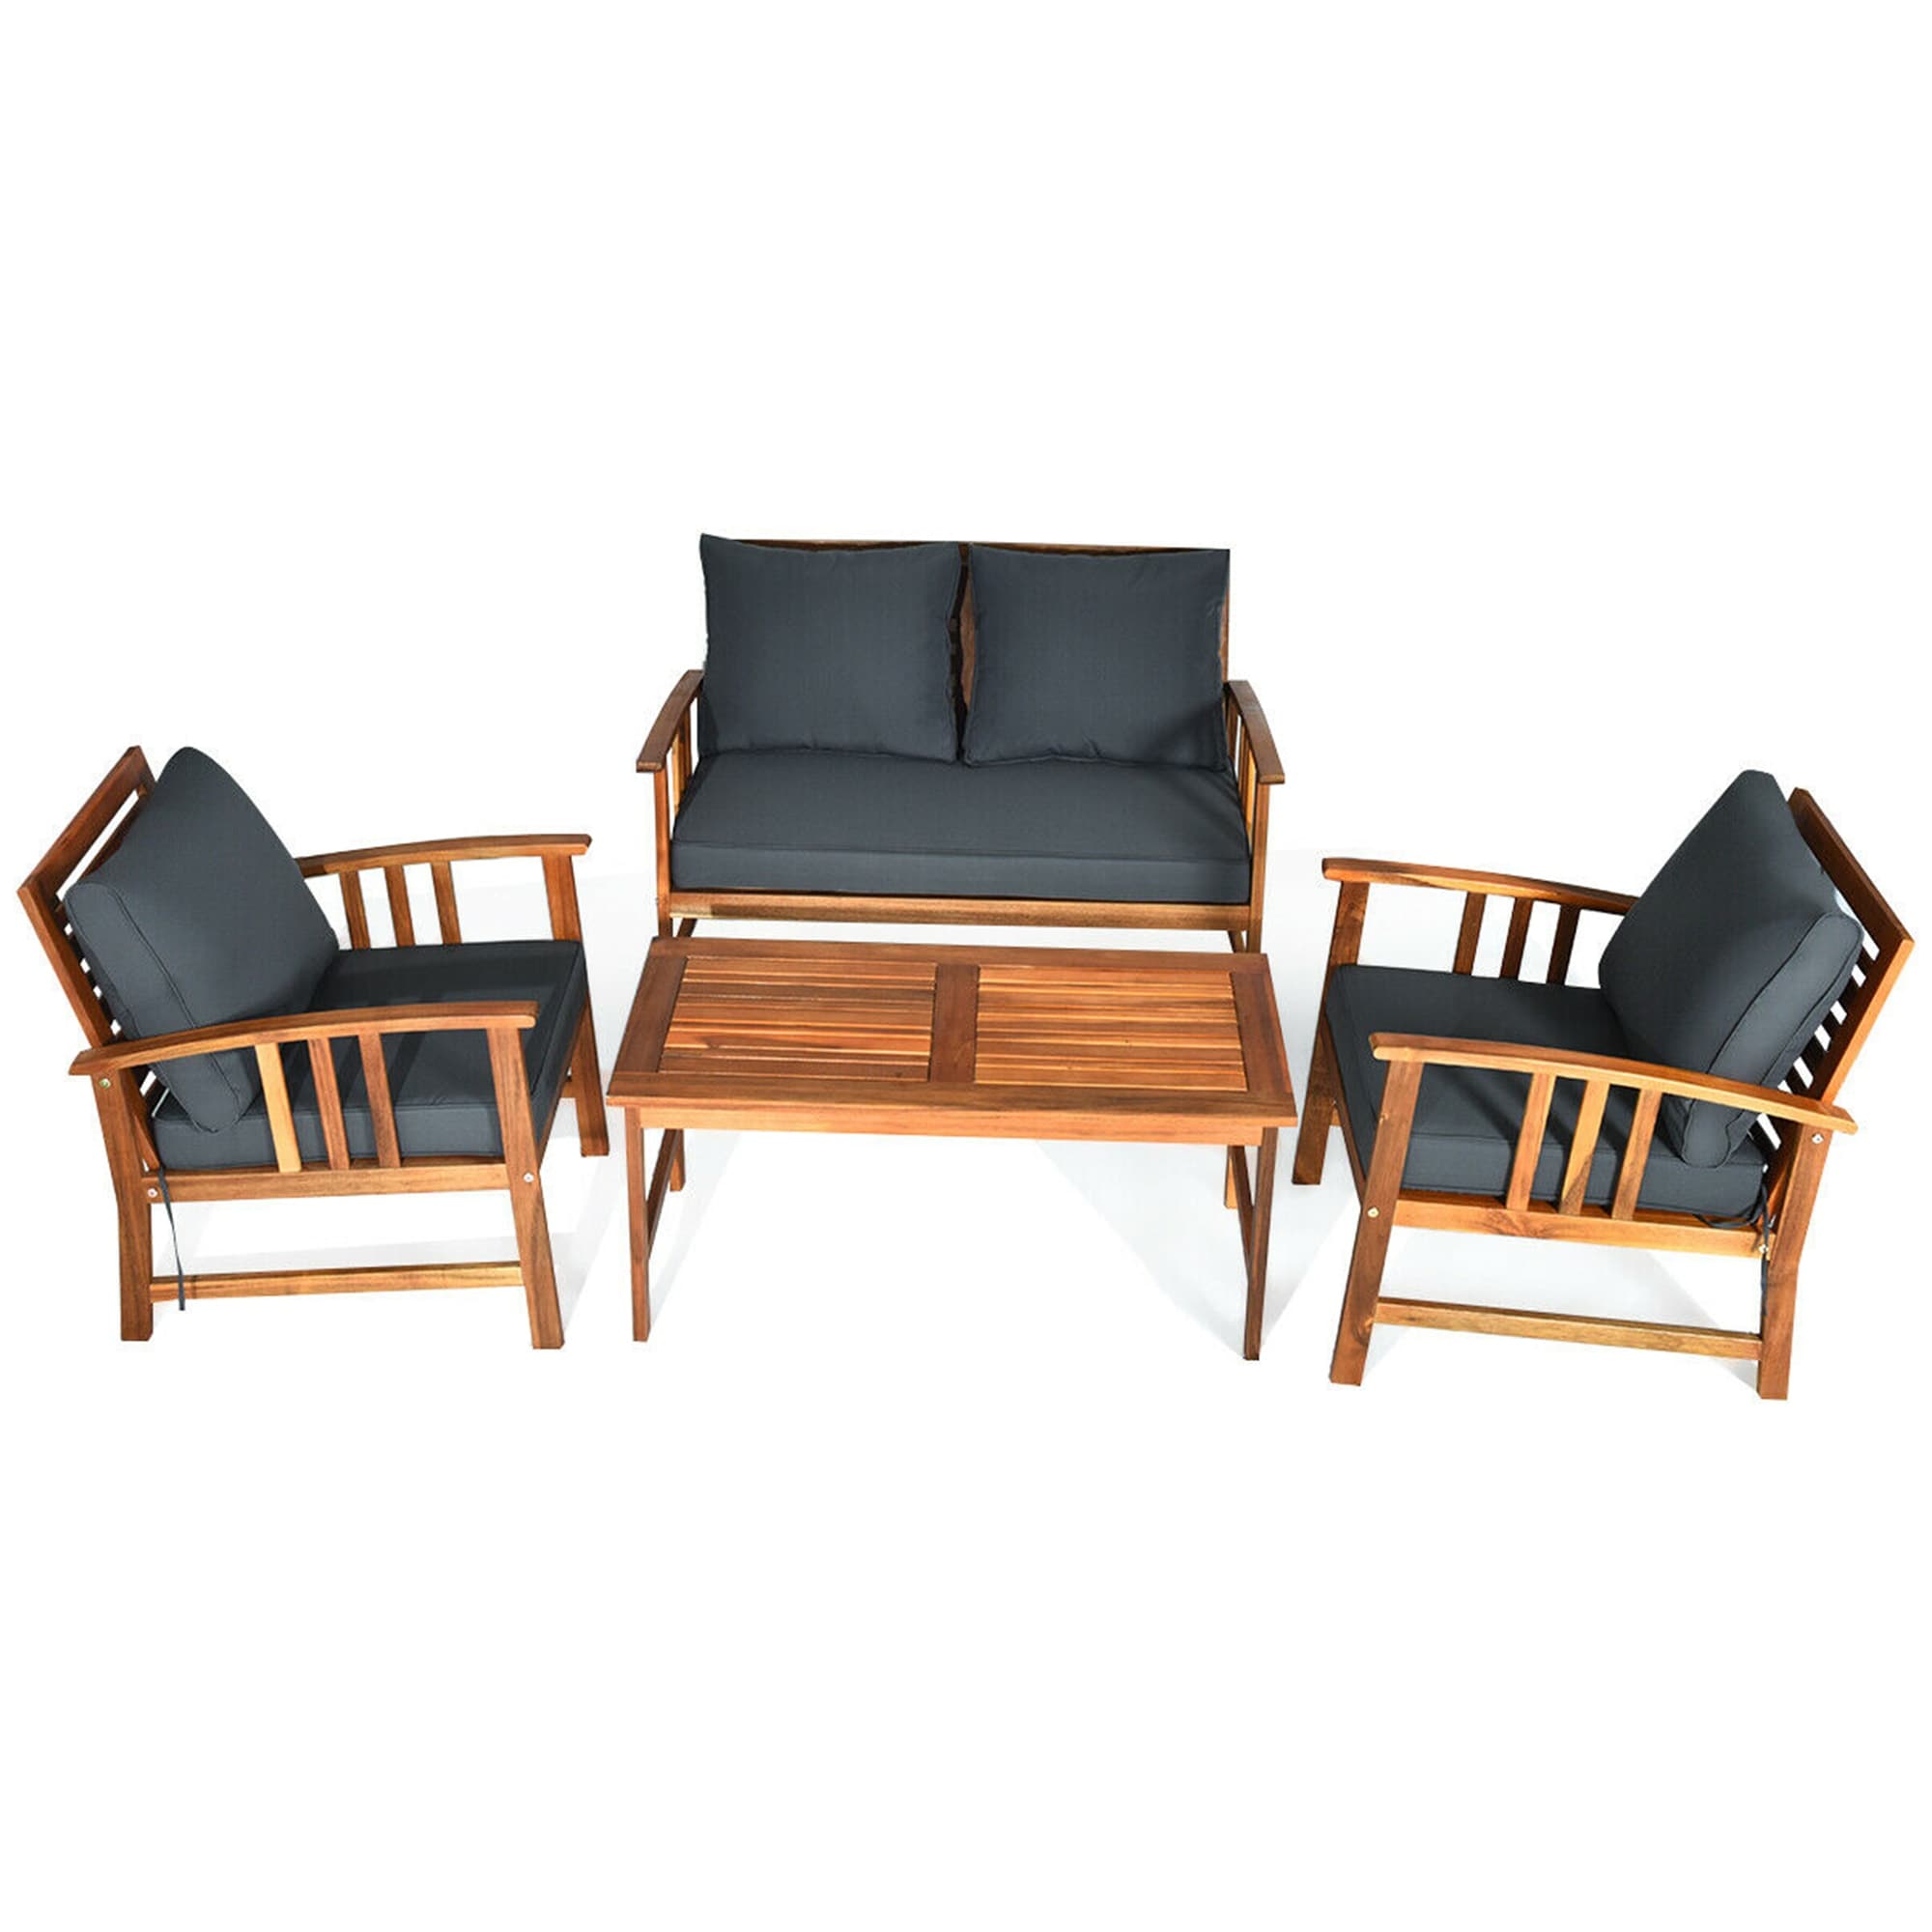 4pcs Wood Outdoor Sofa Chair Set Patio Conversation Set With Cushions